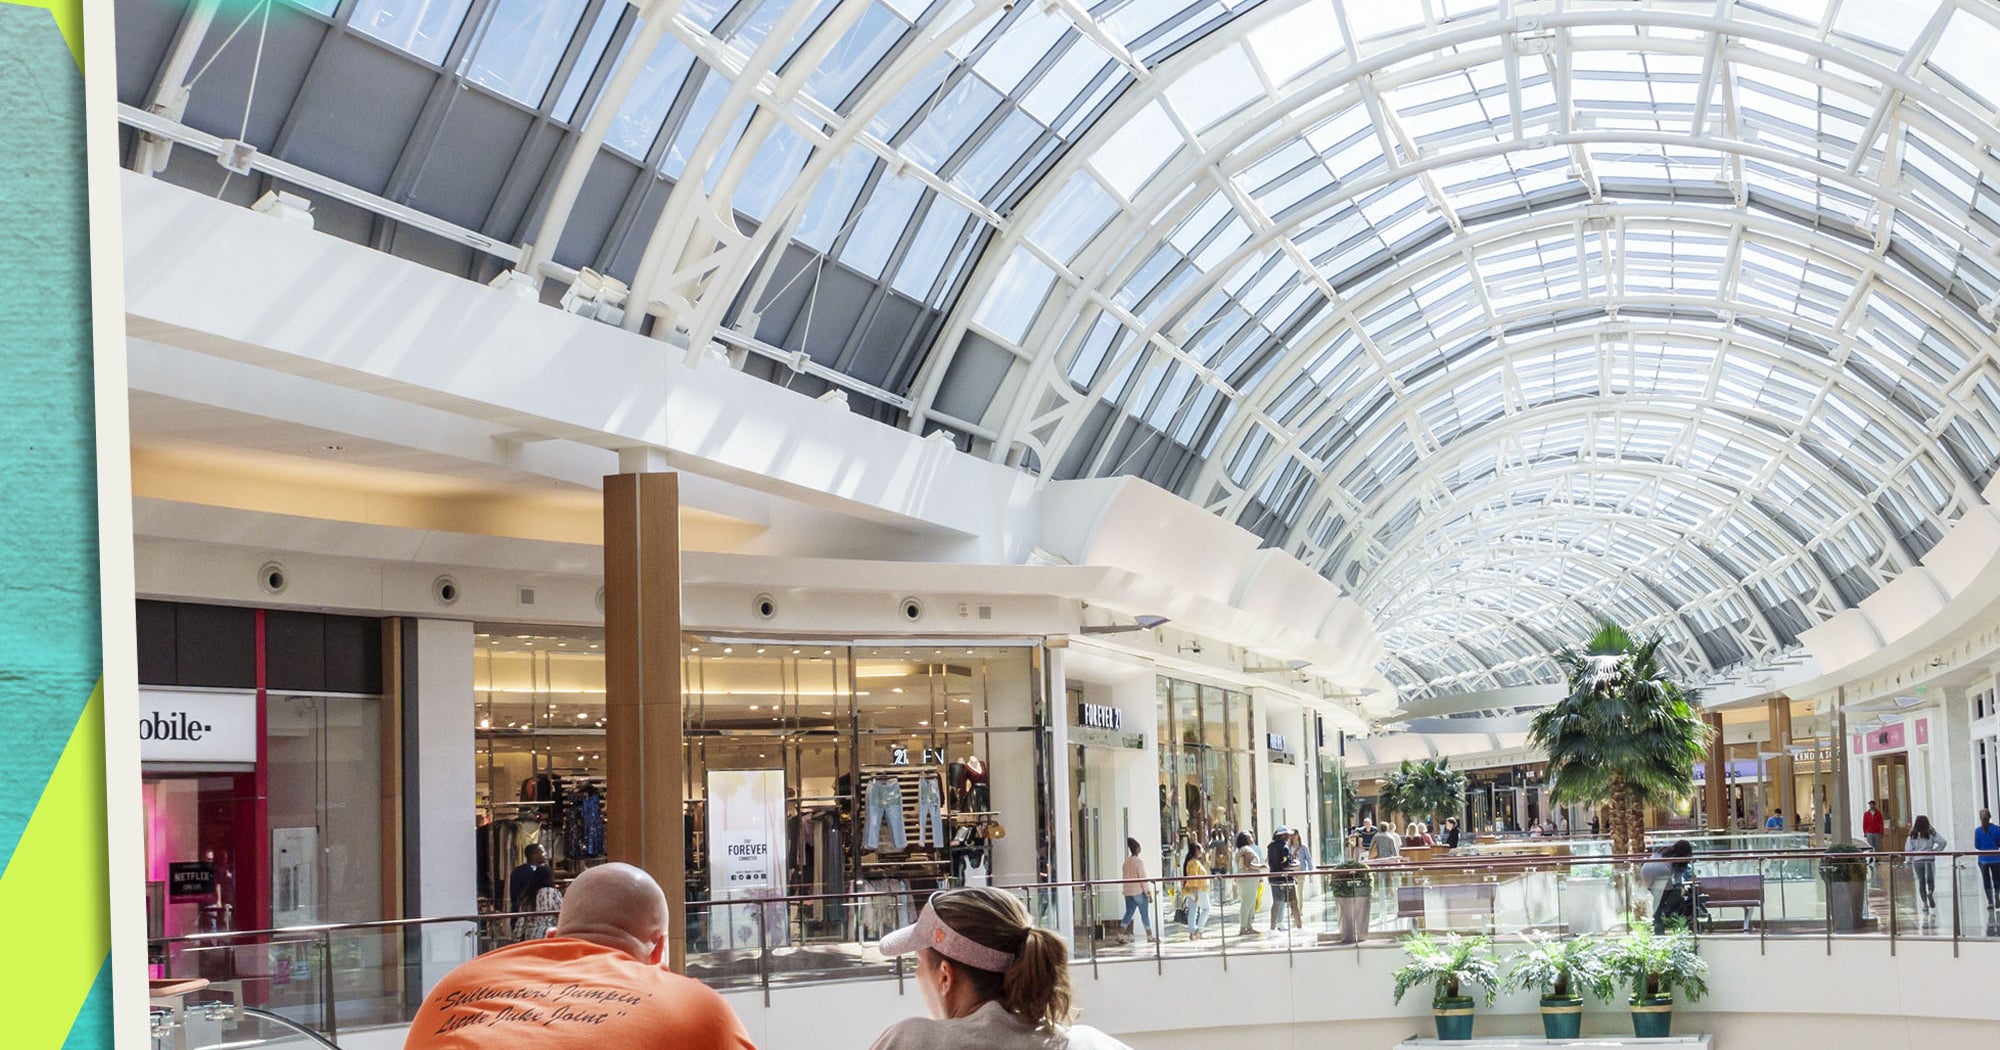 Malls face changing tastes, Local News